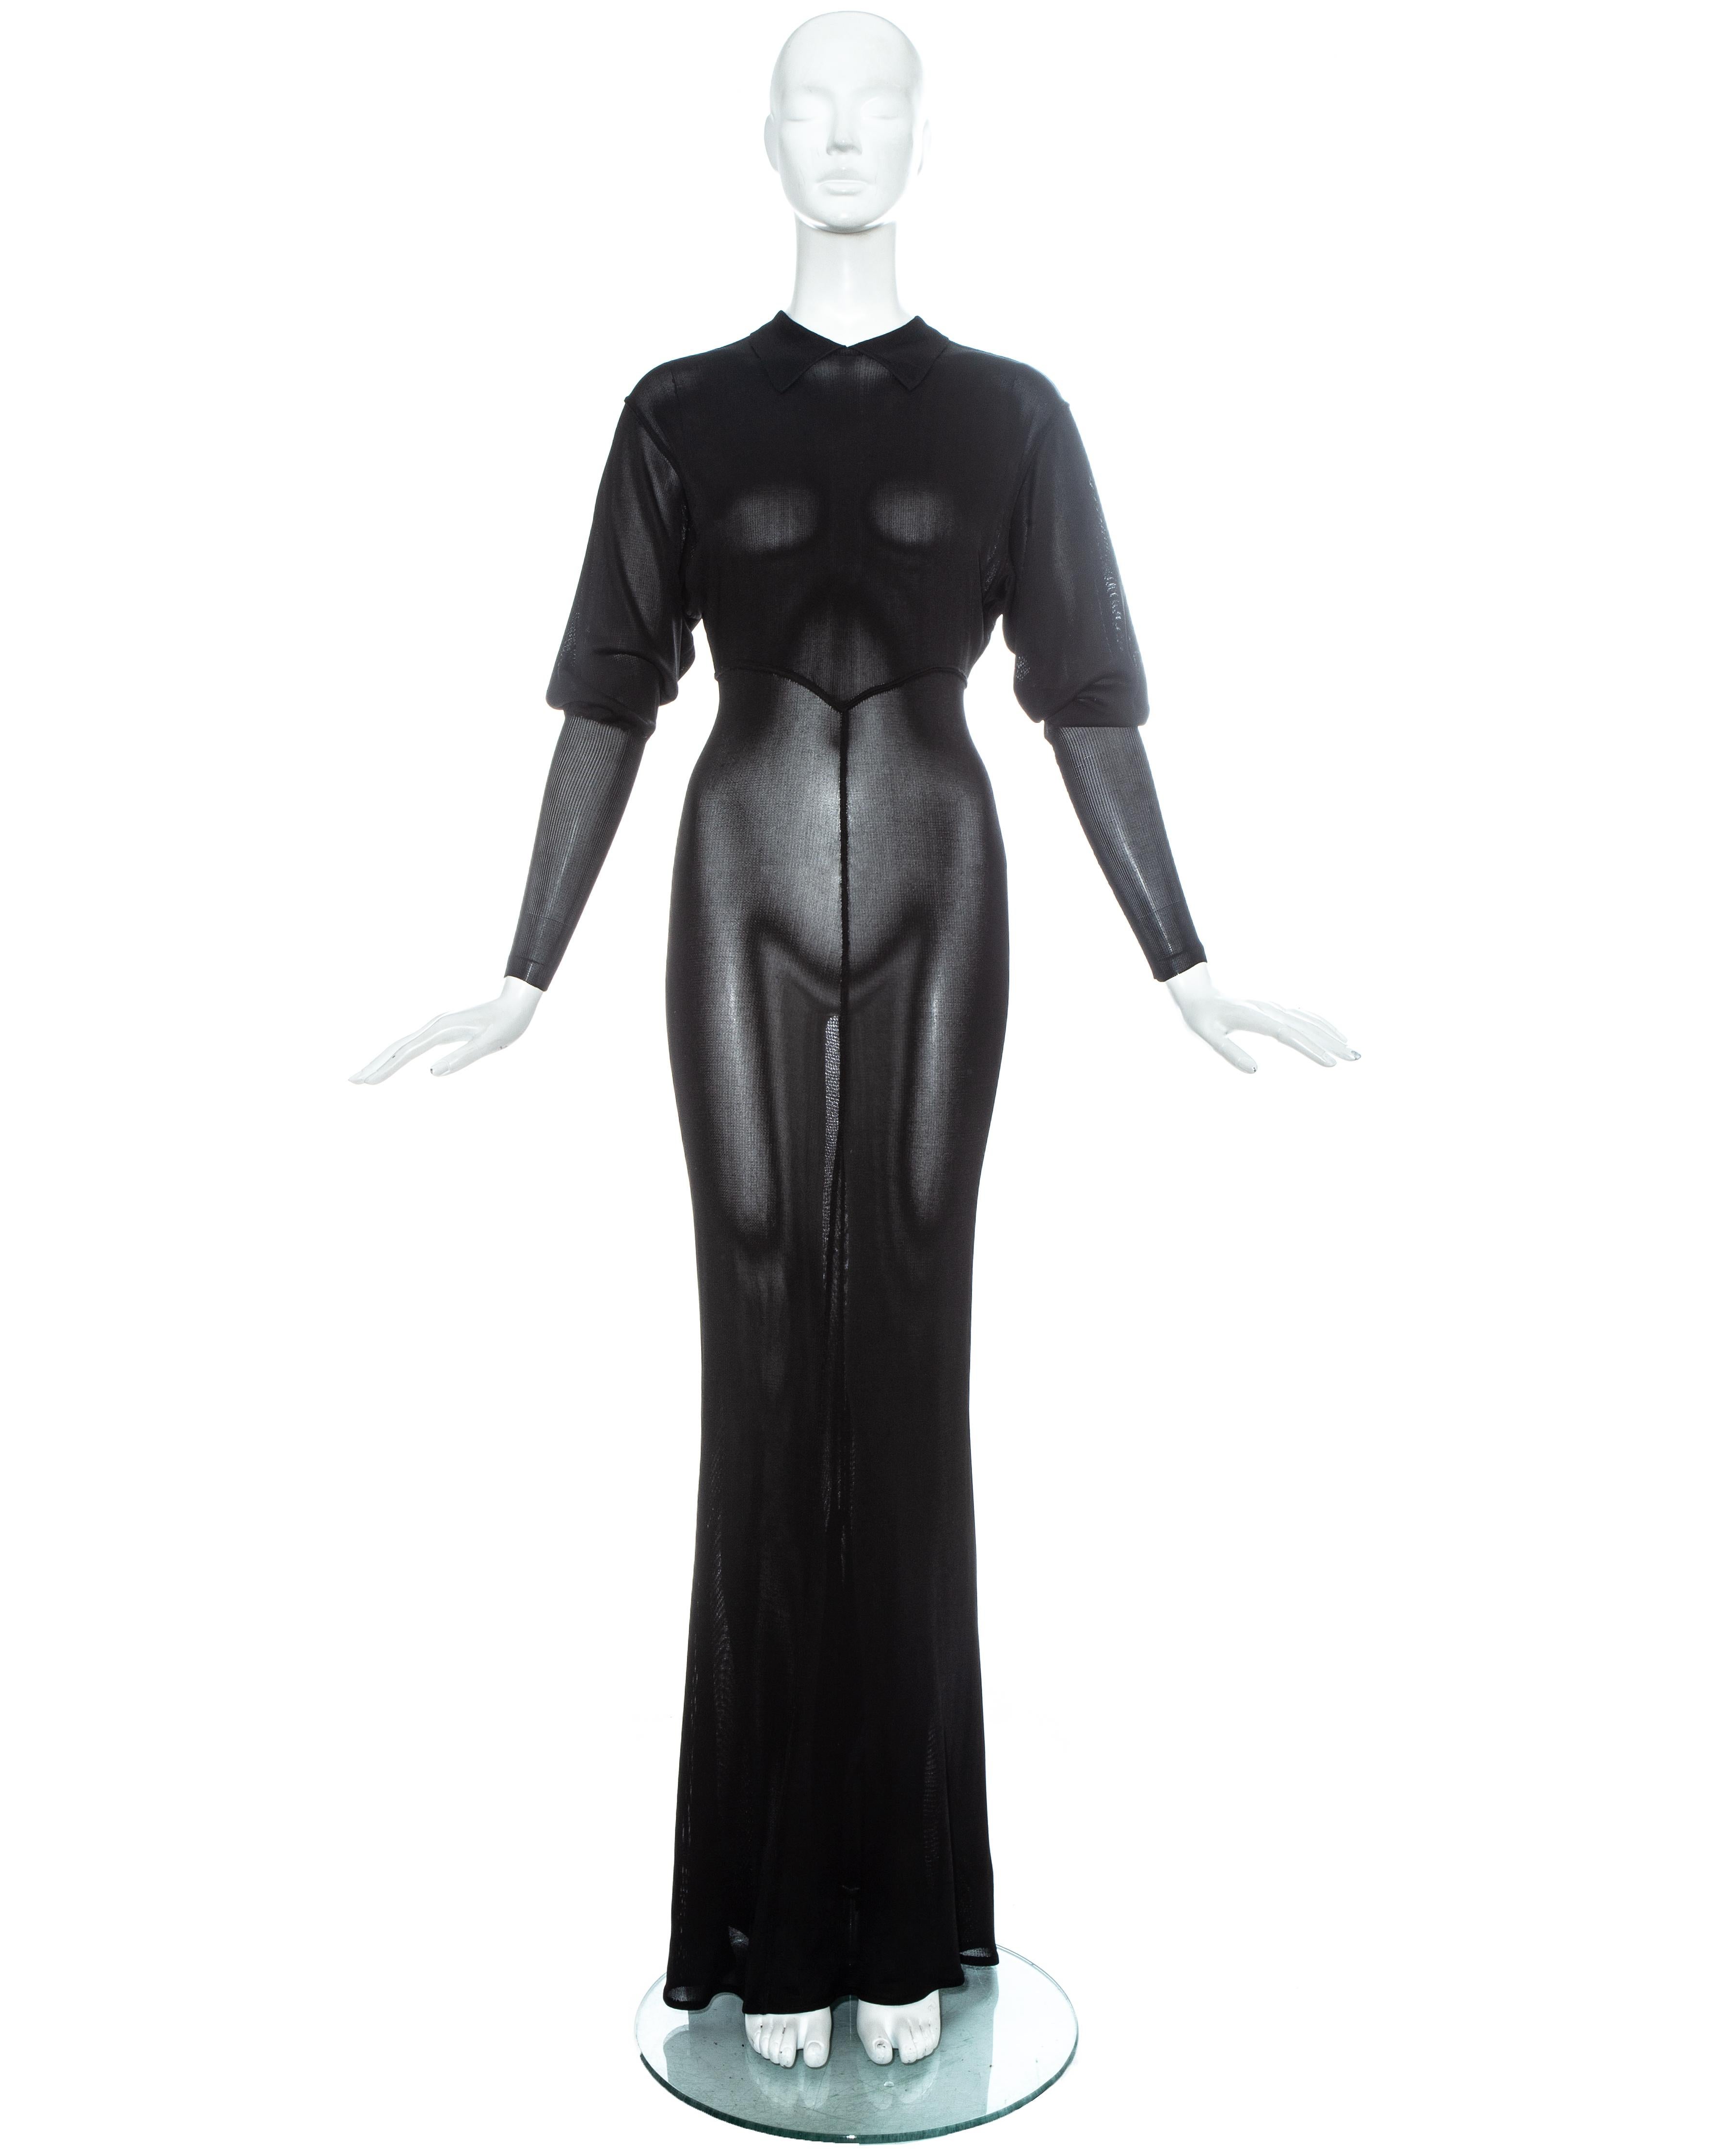 Azzedine Alaia black acetate knit evening maxi dress with pointed collar, opening at the back and train.

Fall-Winter 1986
